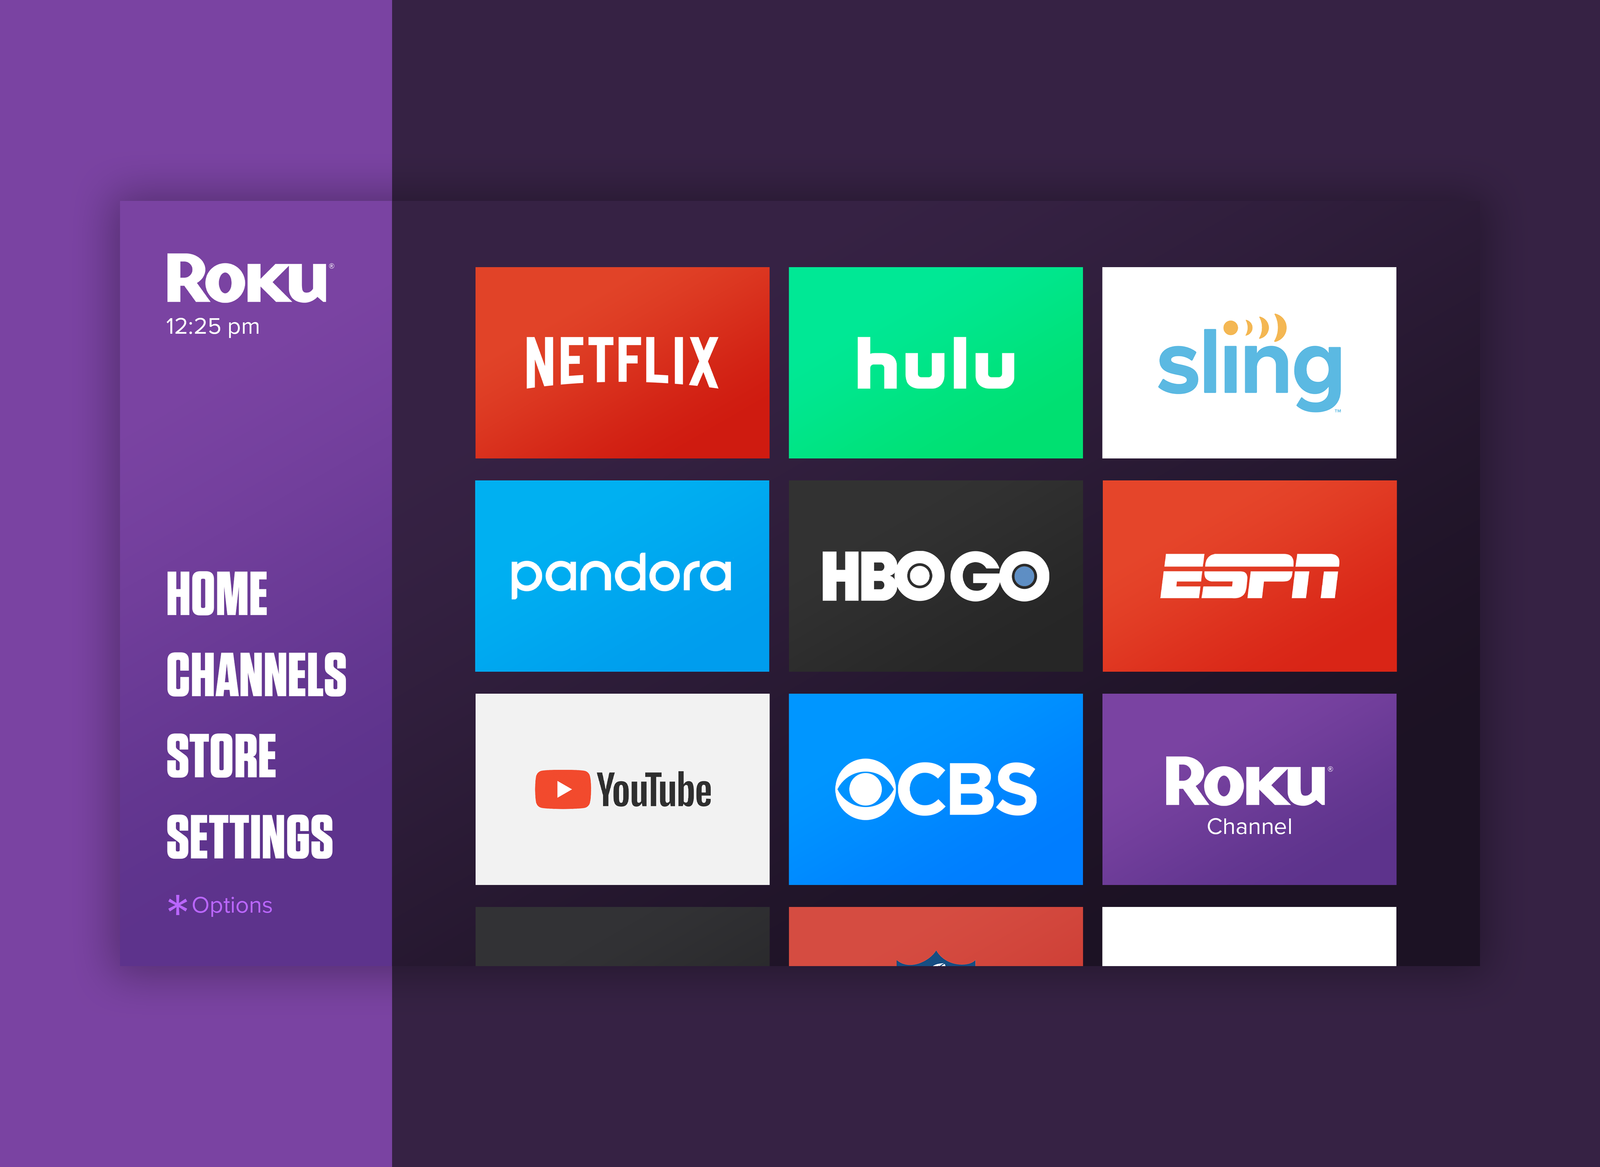 Roku Home Screen Redesign by Christopher Stoney on Dribbble